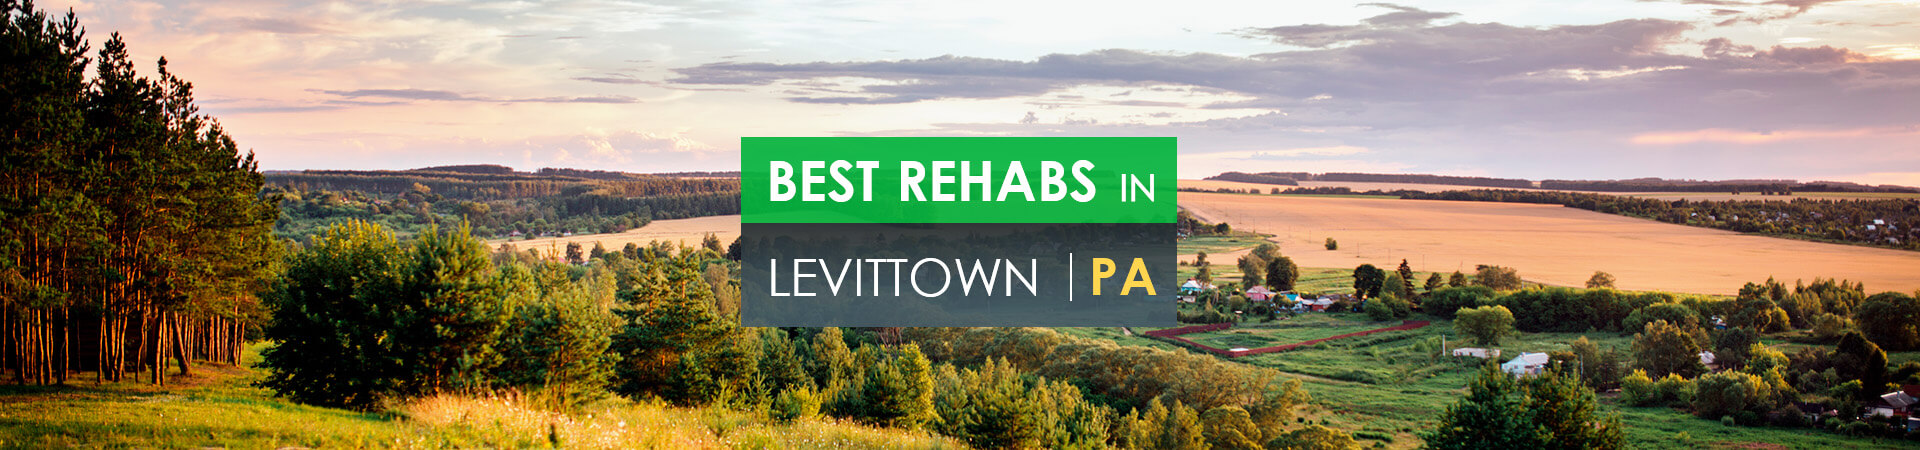 Best rehabs in Levittown, PA